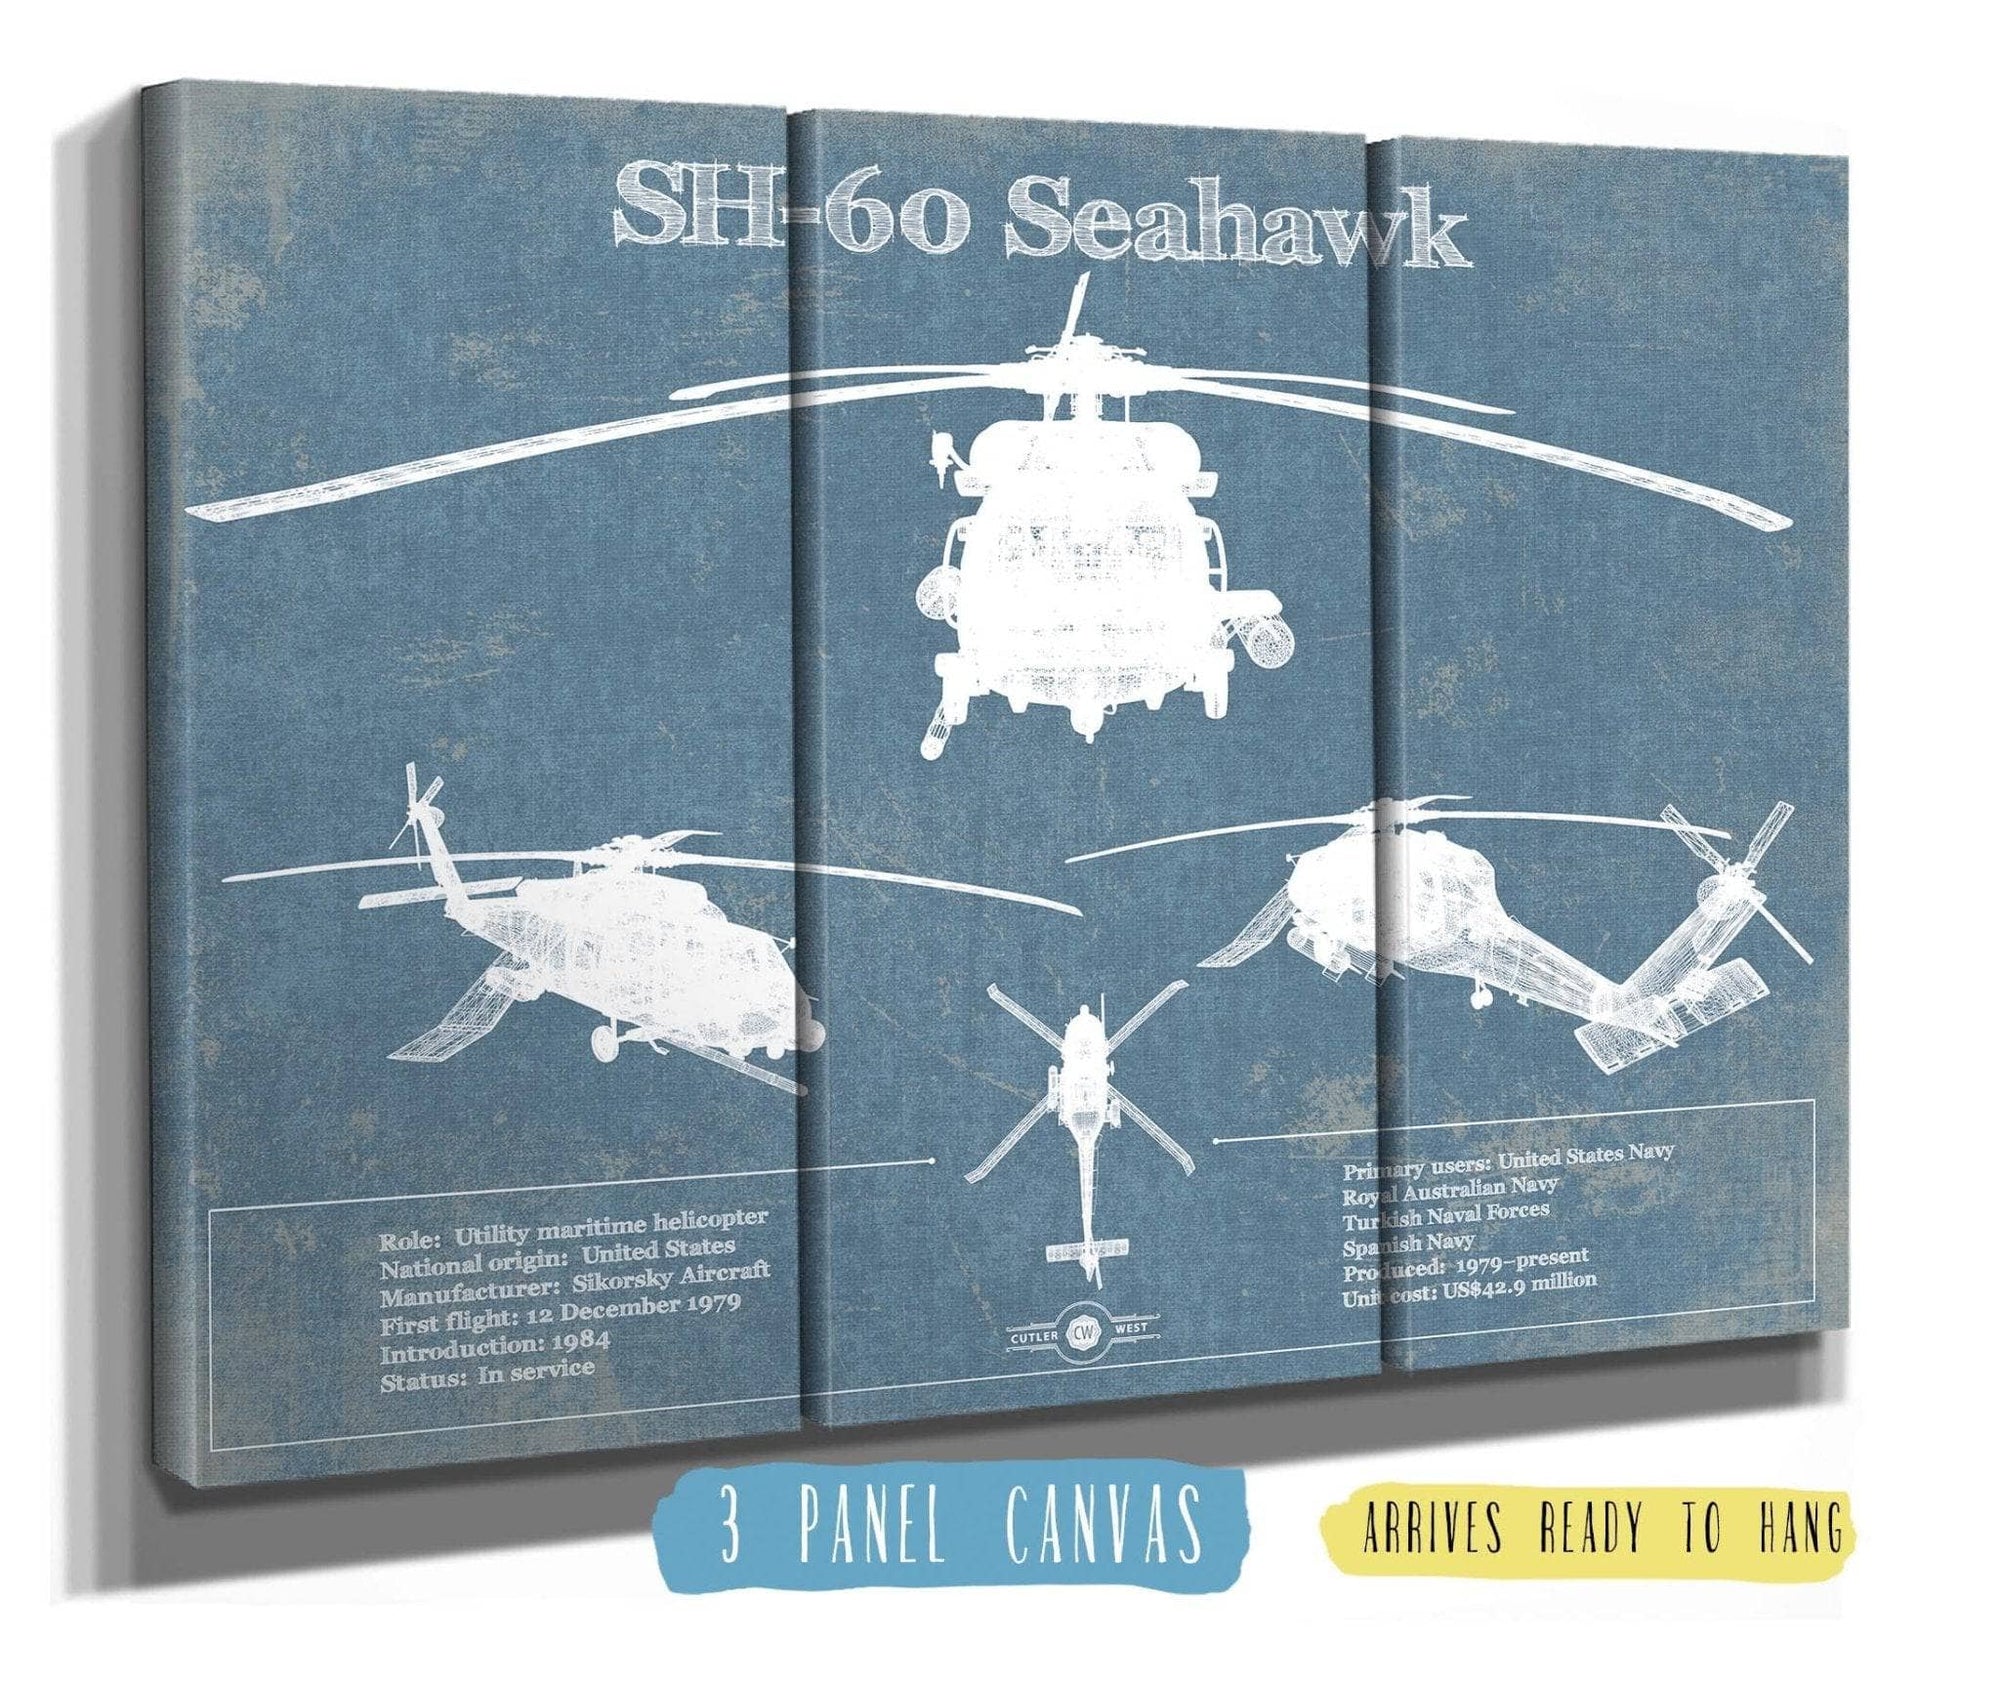 Cutler West Military Aircraft 48" x 32" / 3 Panel Canvas Wrap SH-60/MH-60 Seahawk Helicopter Vintage Aviation Blueprint Military Print 833447904_25110